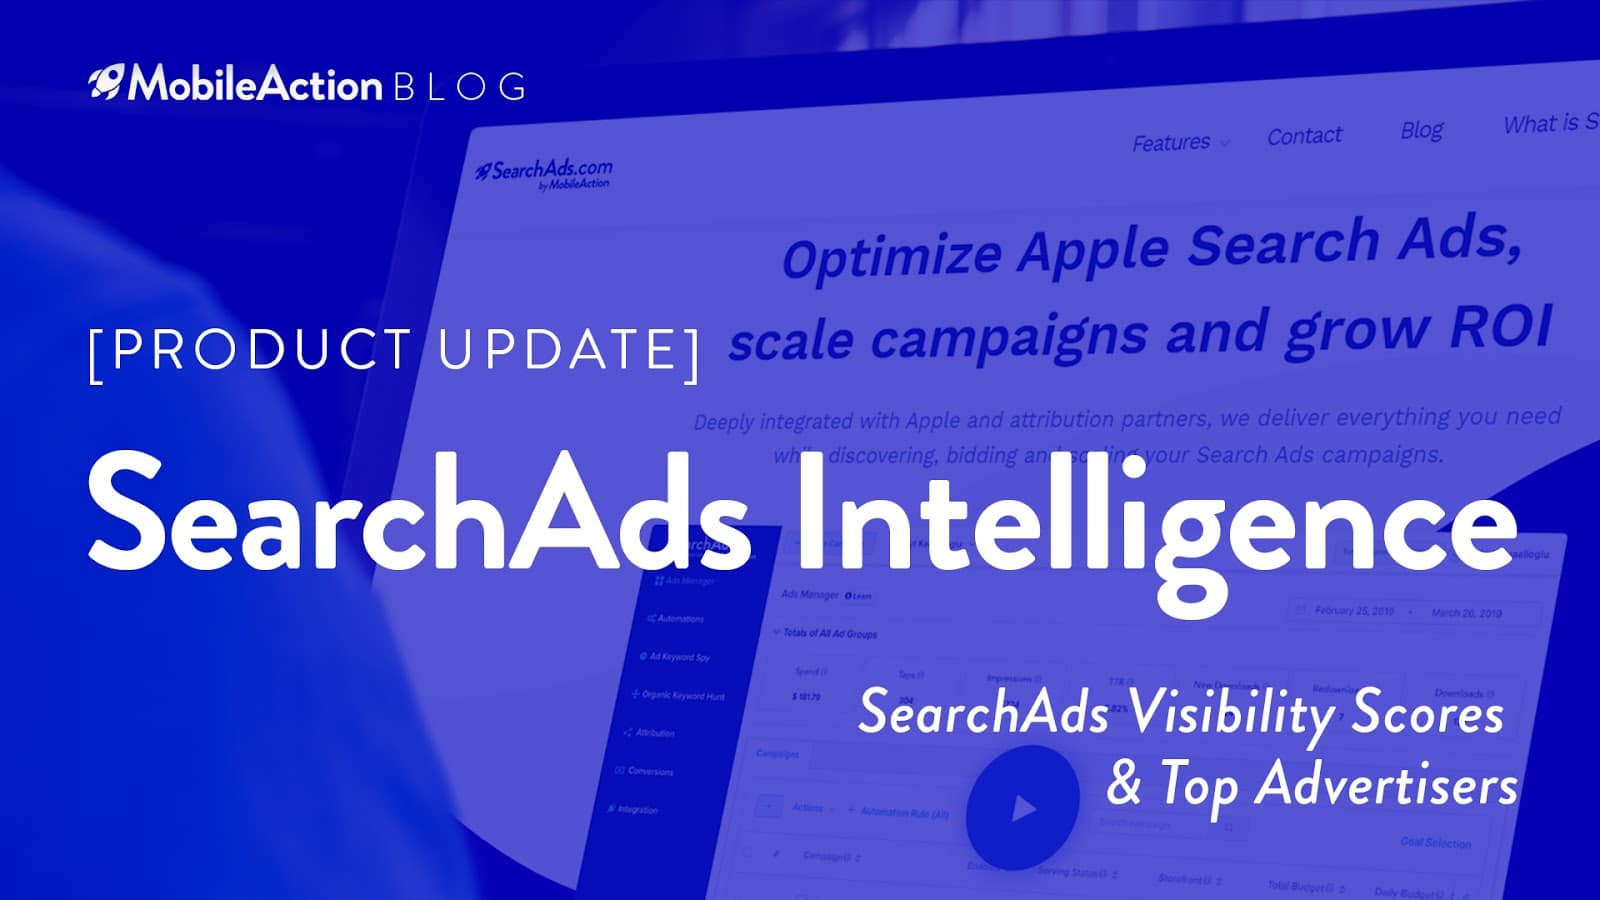 image featuring searchads intelligence product update of MobileAction